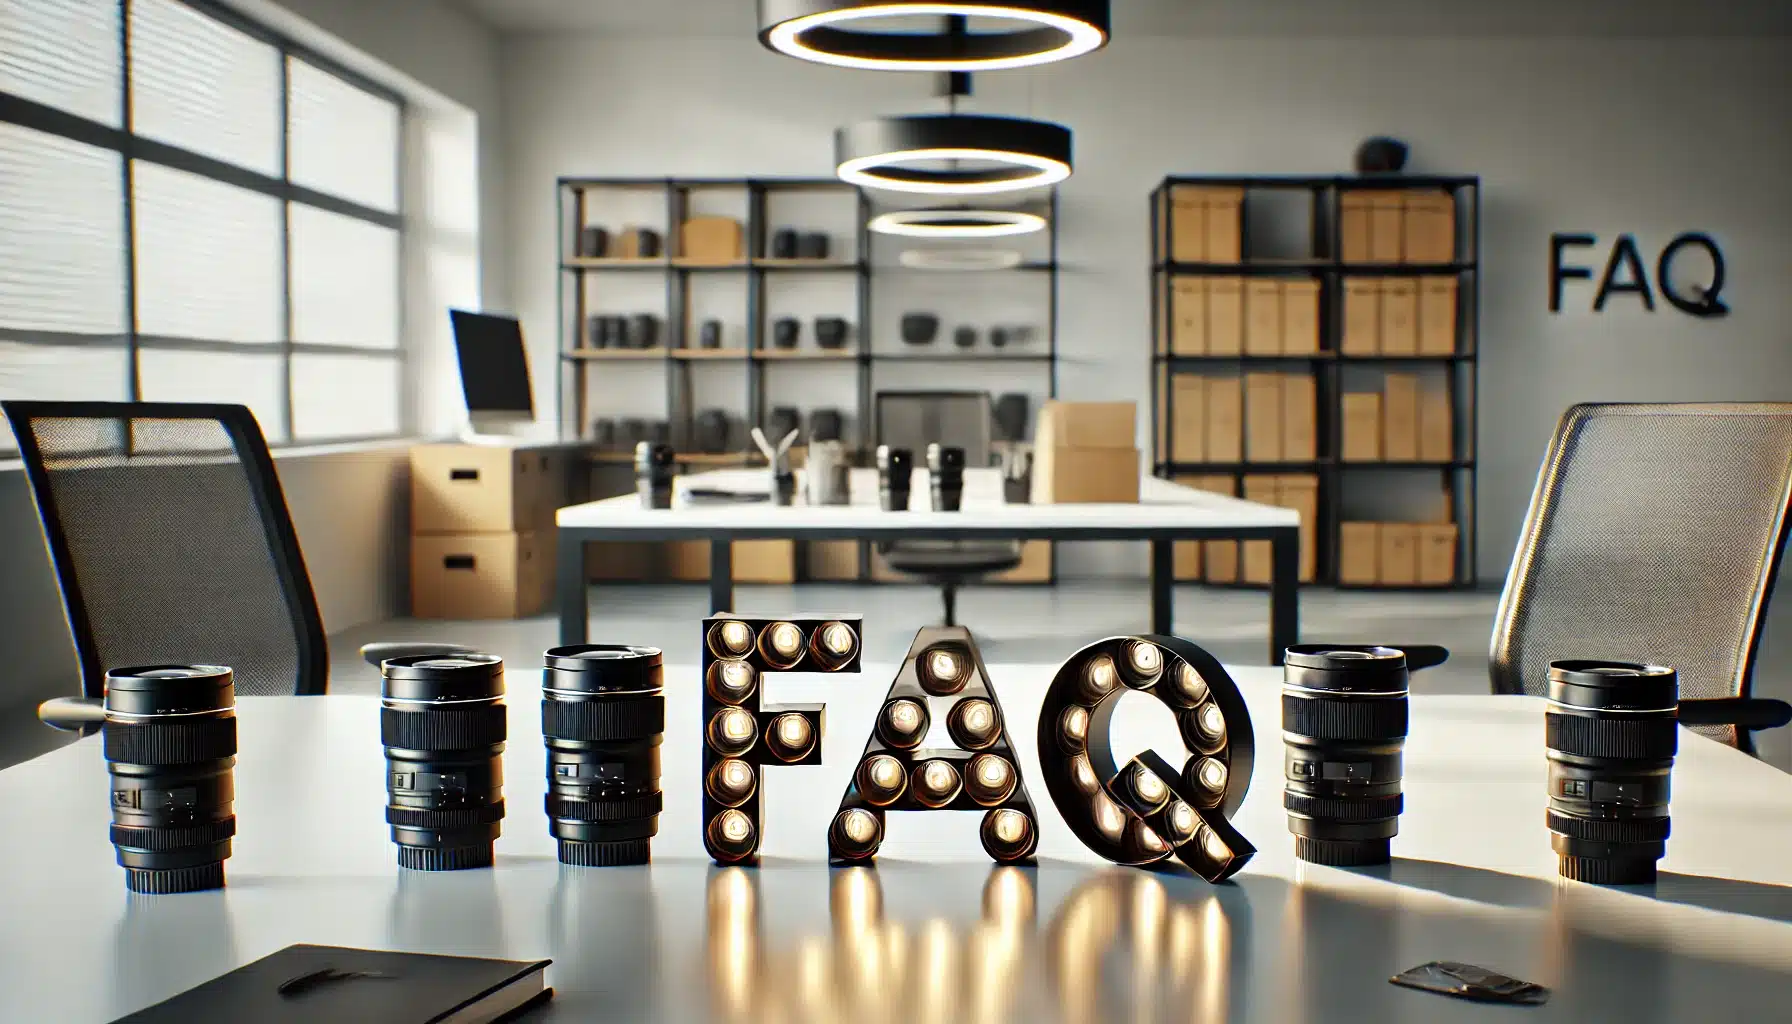 Camera lenses arranged on a clean desk in a modern office to spell out the word 'FAQ'. The desk is minimalistic with some office supplies in the background.